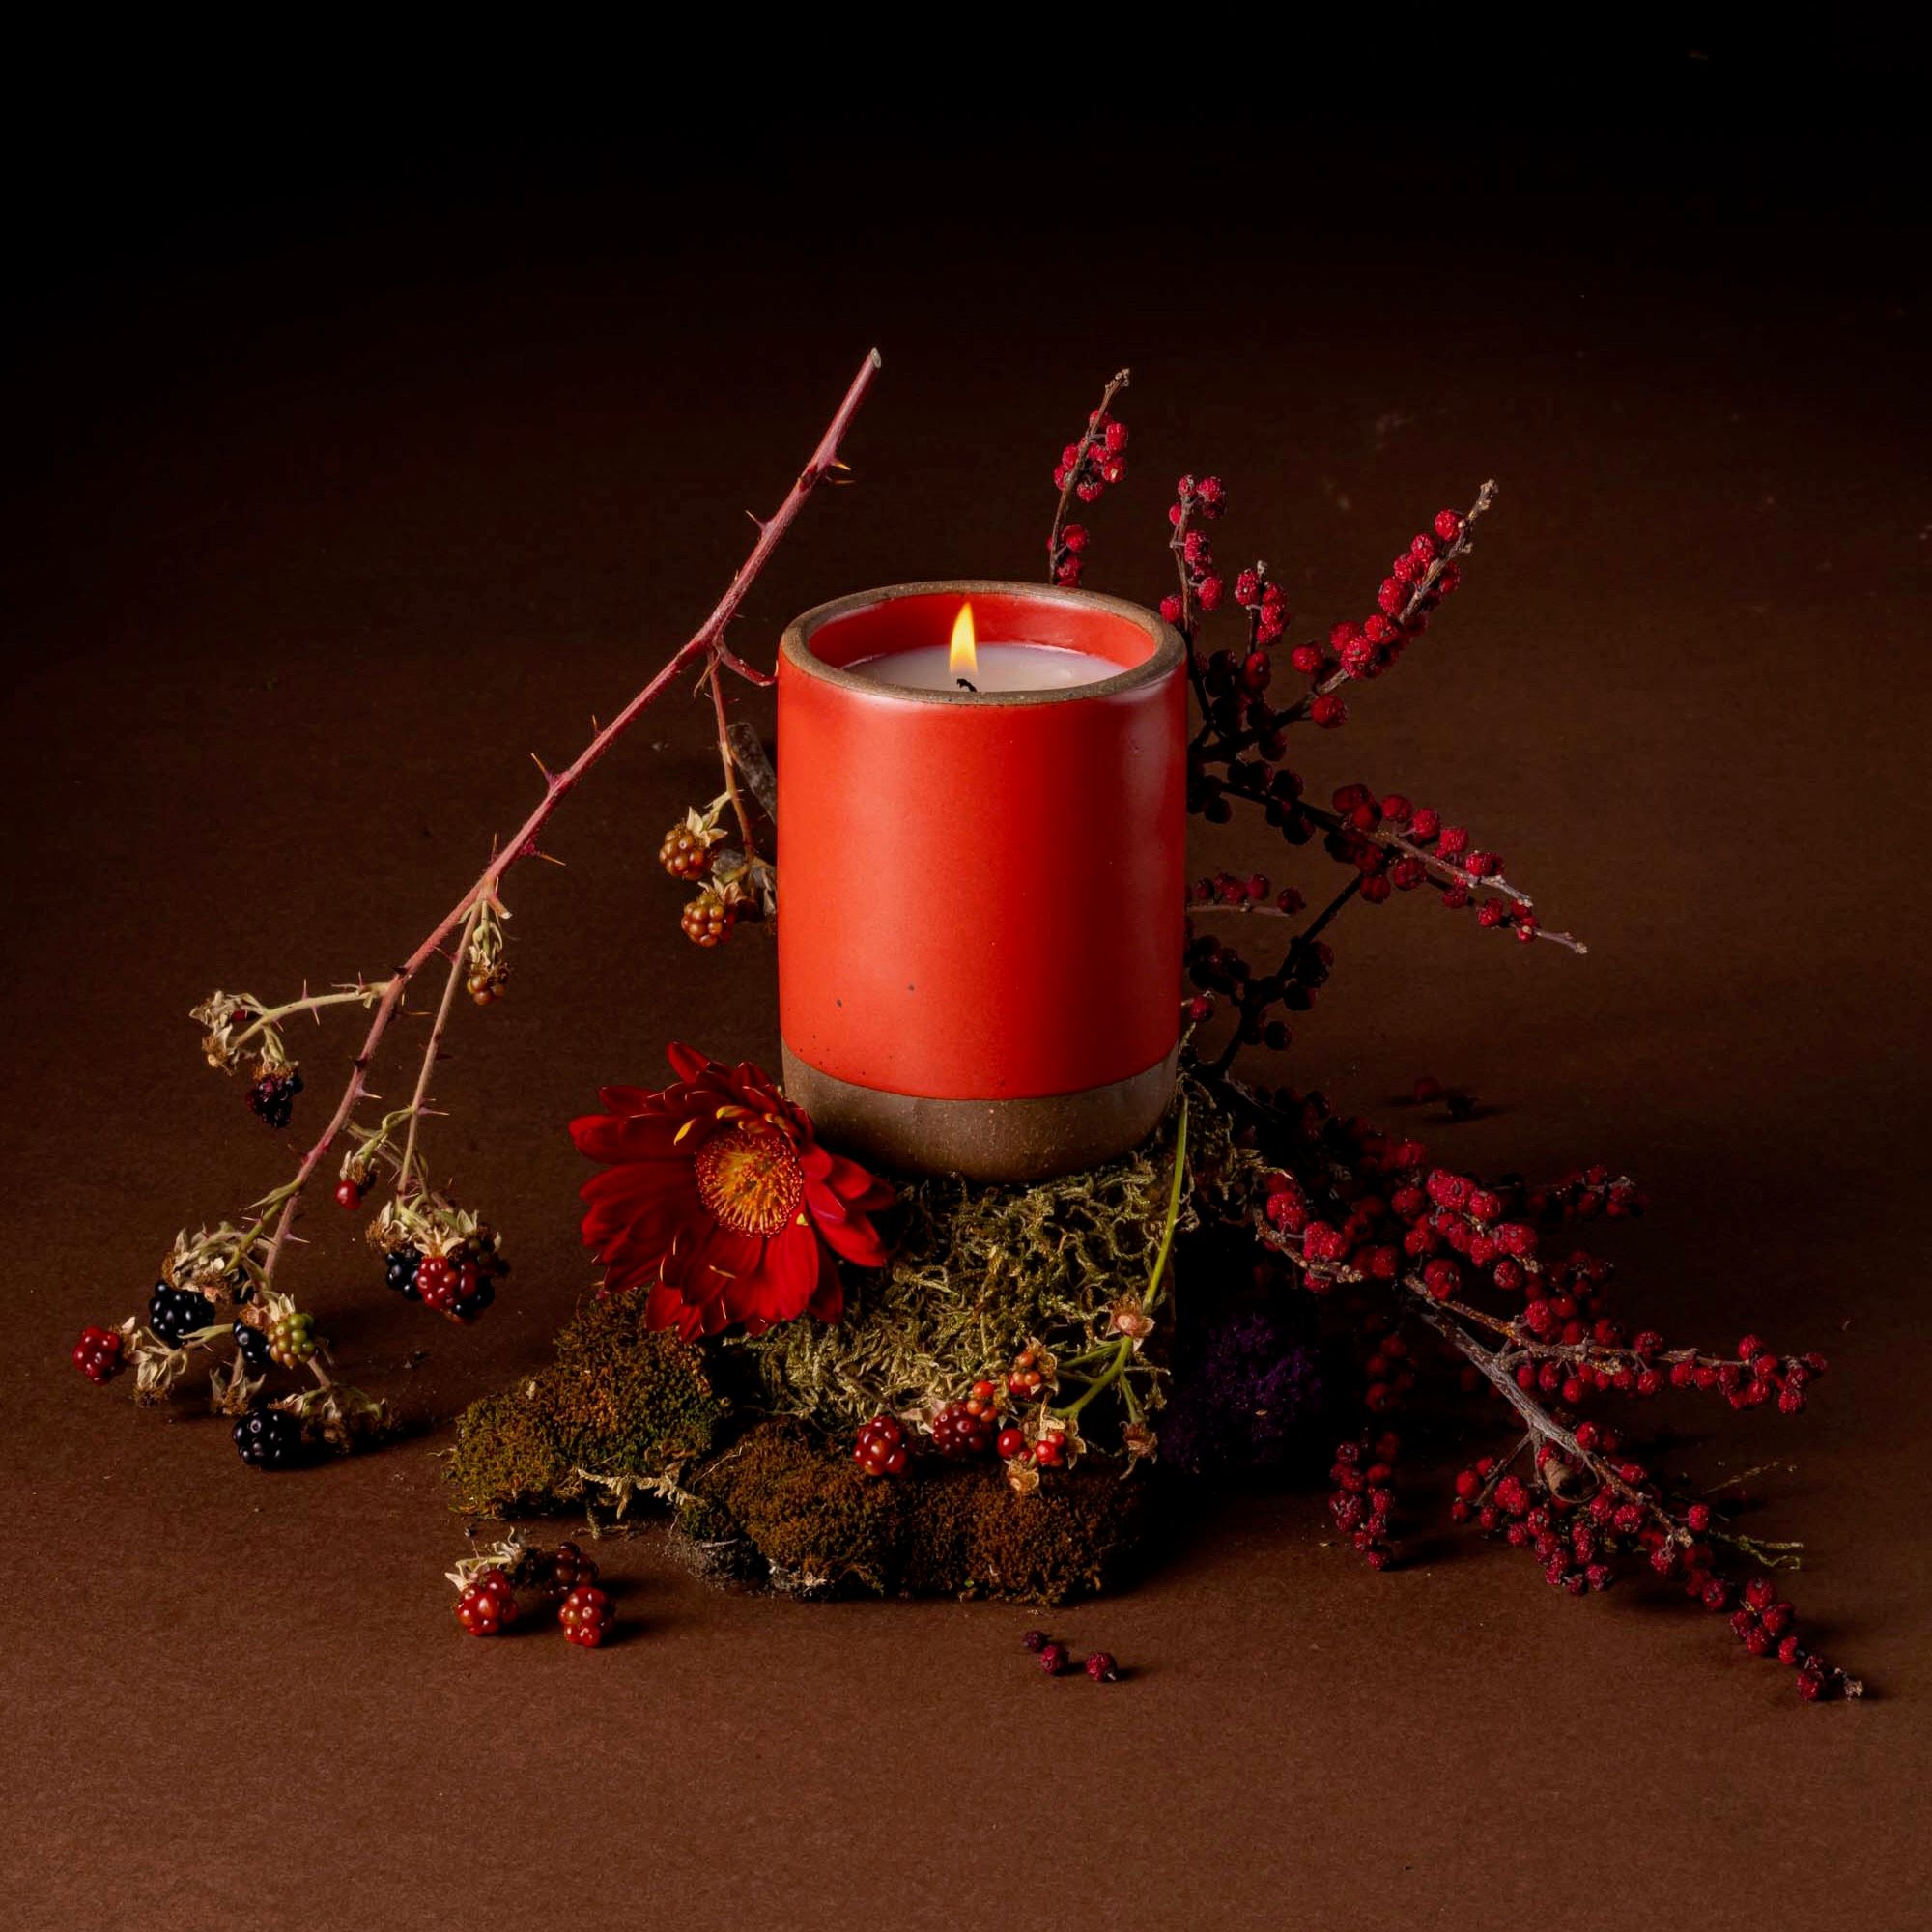 A bold red ceramic vessel with a lit candle inside sitting up on a small bed of moss and dirt, surrounded by berries and red branches with a brown background